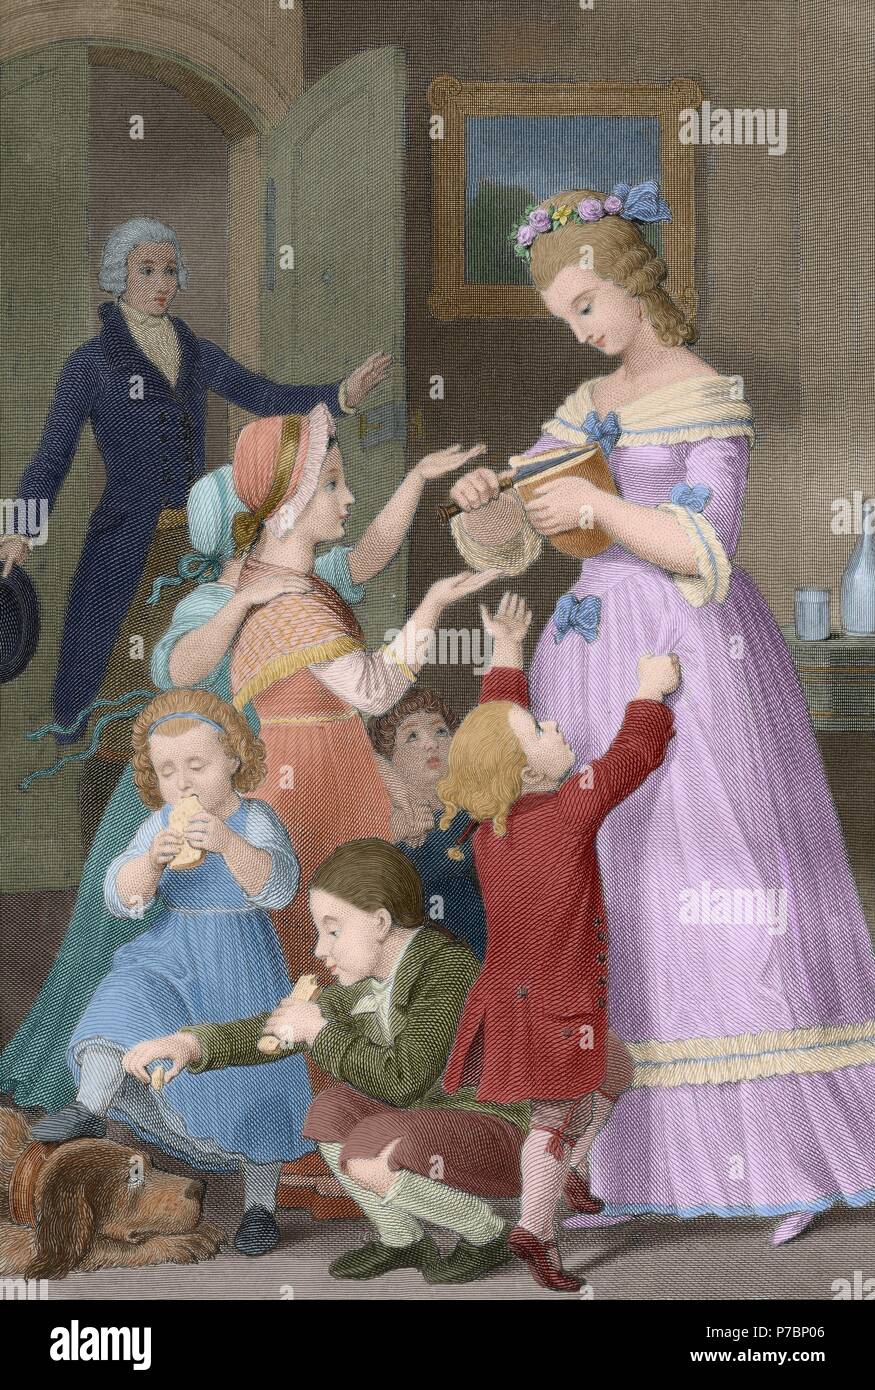 Johann Wolfgang von Goethe (1749-1832). German writer. The Sorrows of Young Werther, 1774. Engraving depicting Werther surprises Charlotte surrounded by children. Edition of 1837. Colored. Stock Photo